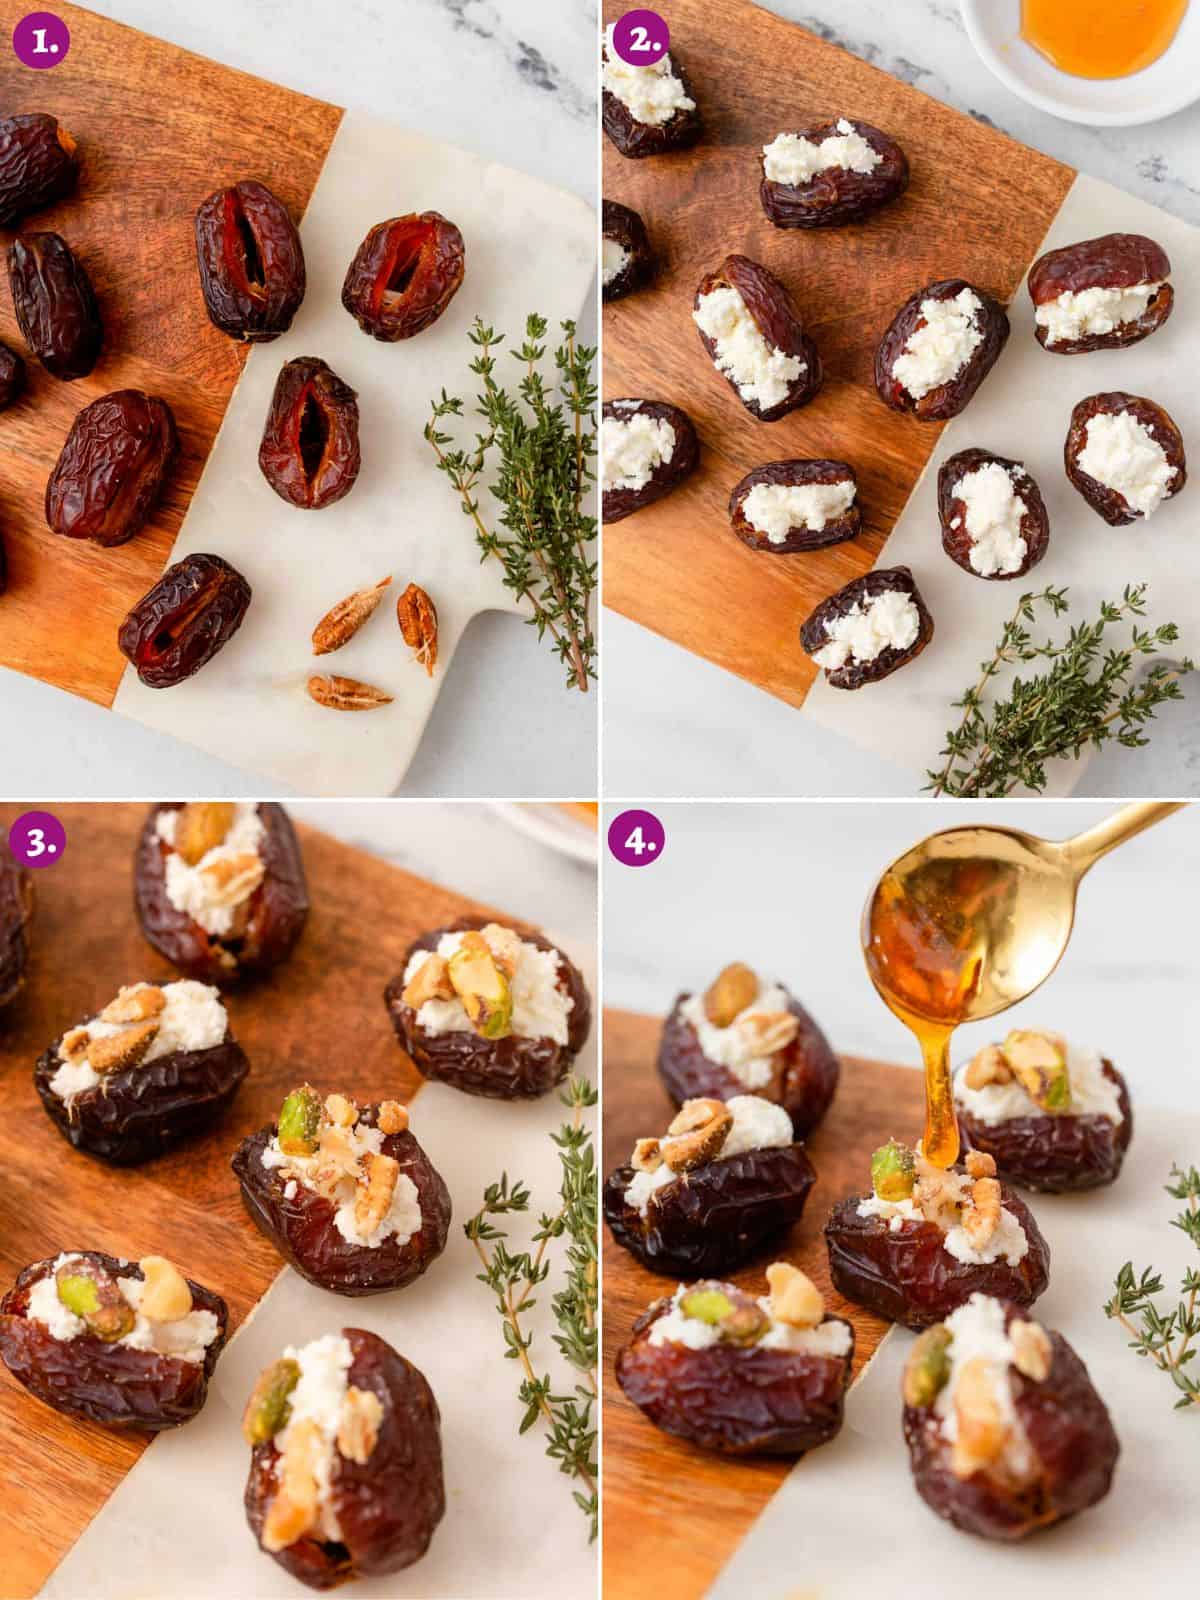 Images showing how to cut, stuff and prepare stuffed dates with goat cheese.